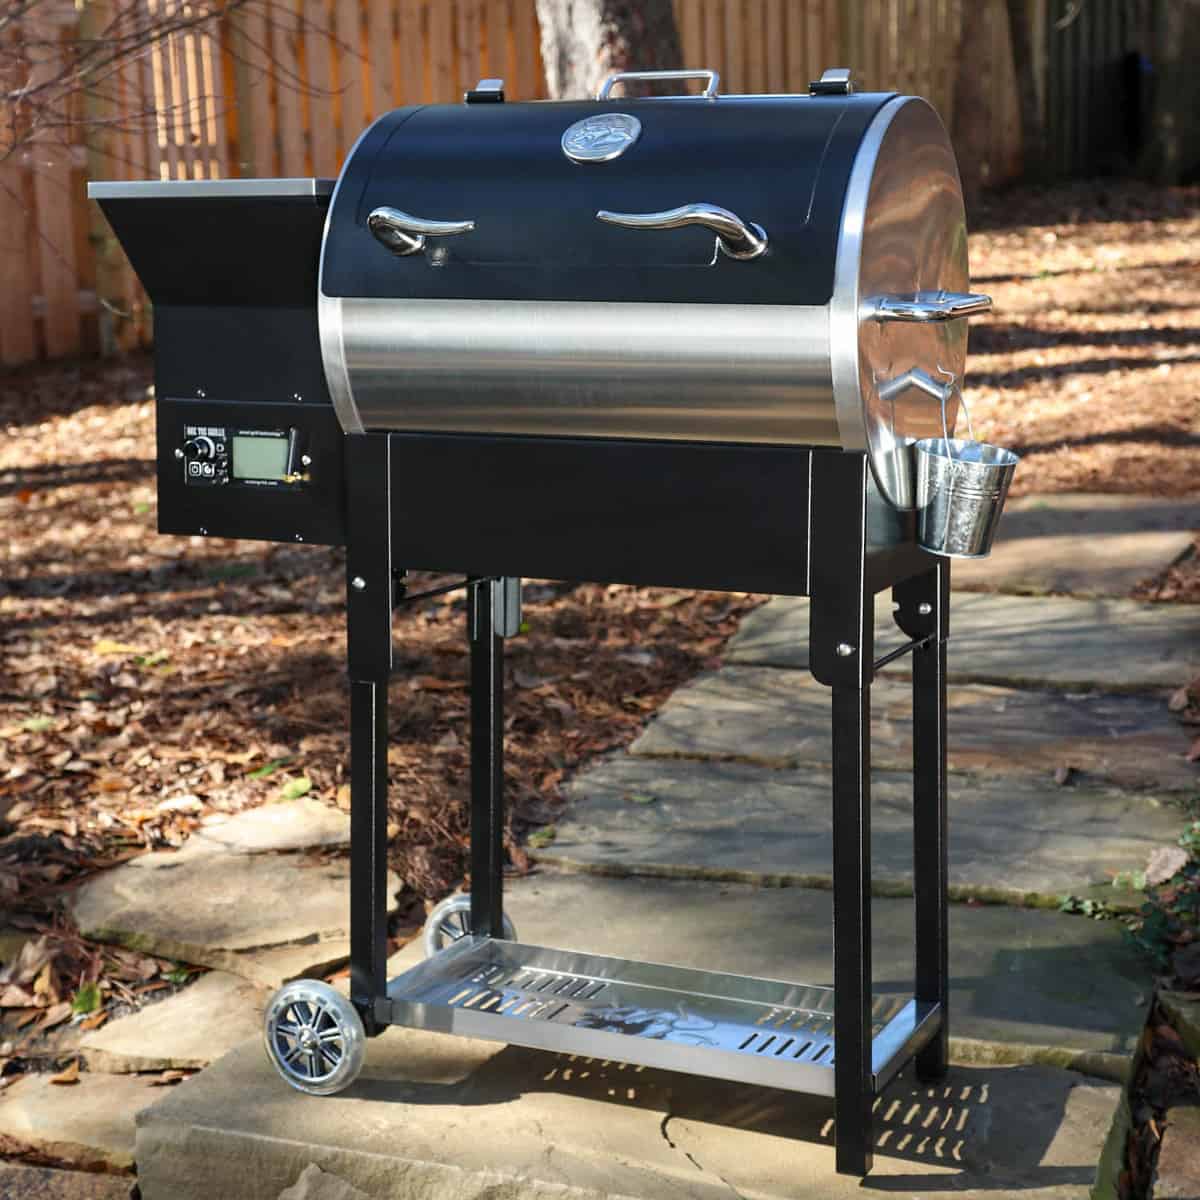 Recteq RT-340 review: A smart grill that alerts when meat is